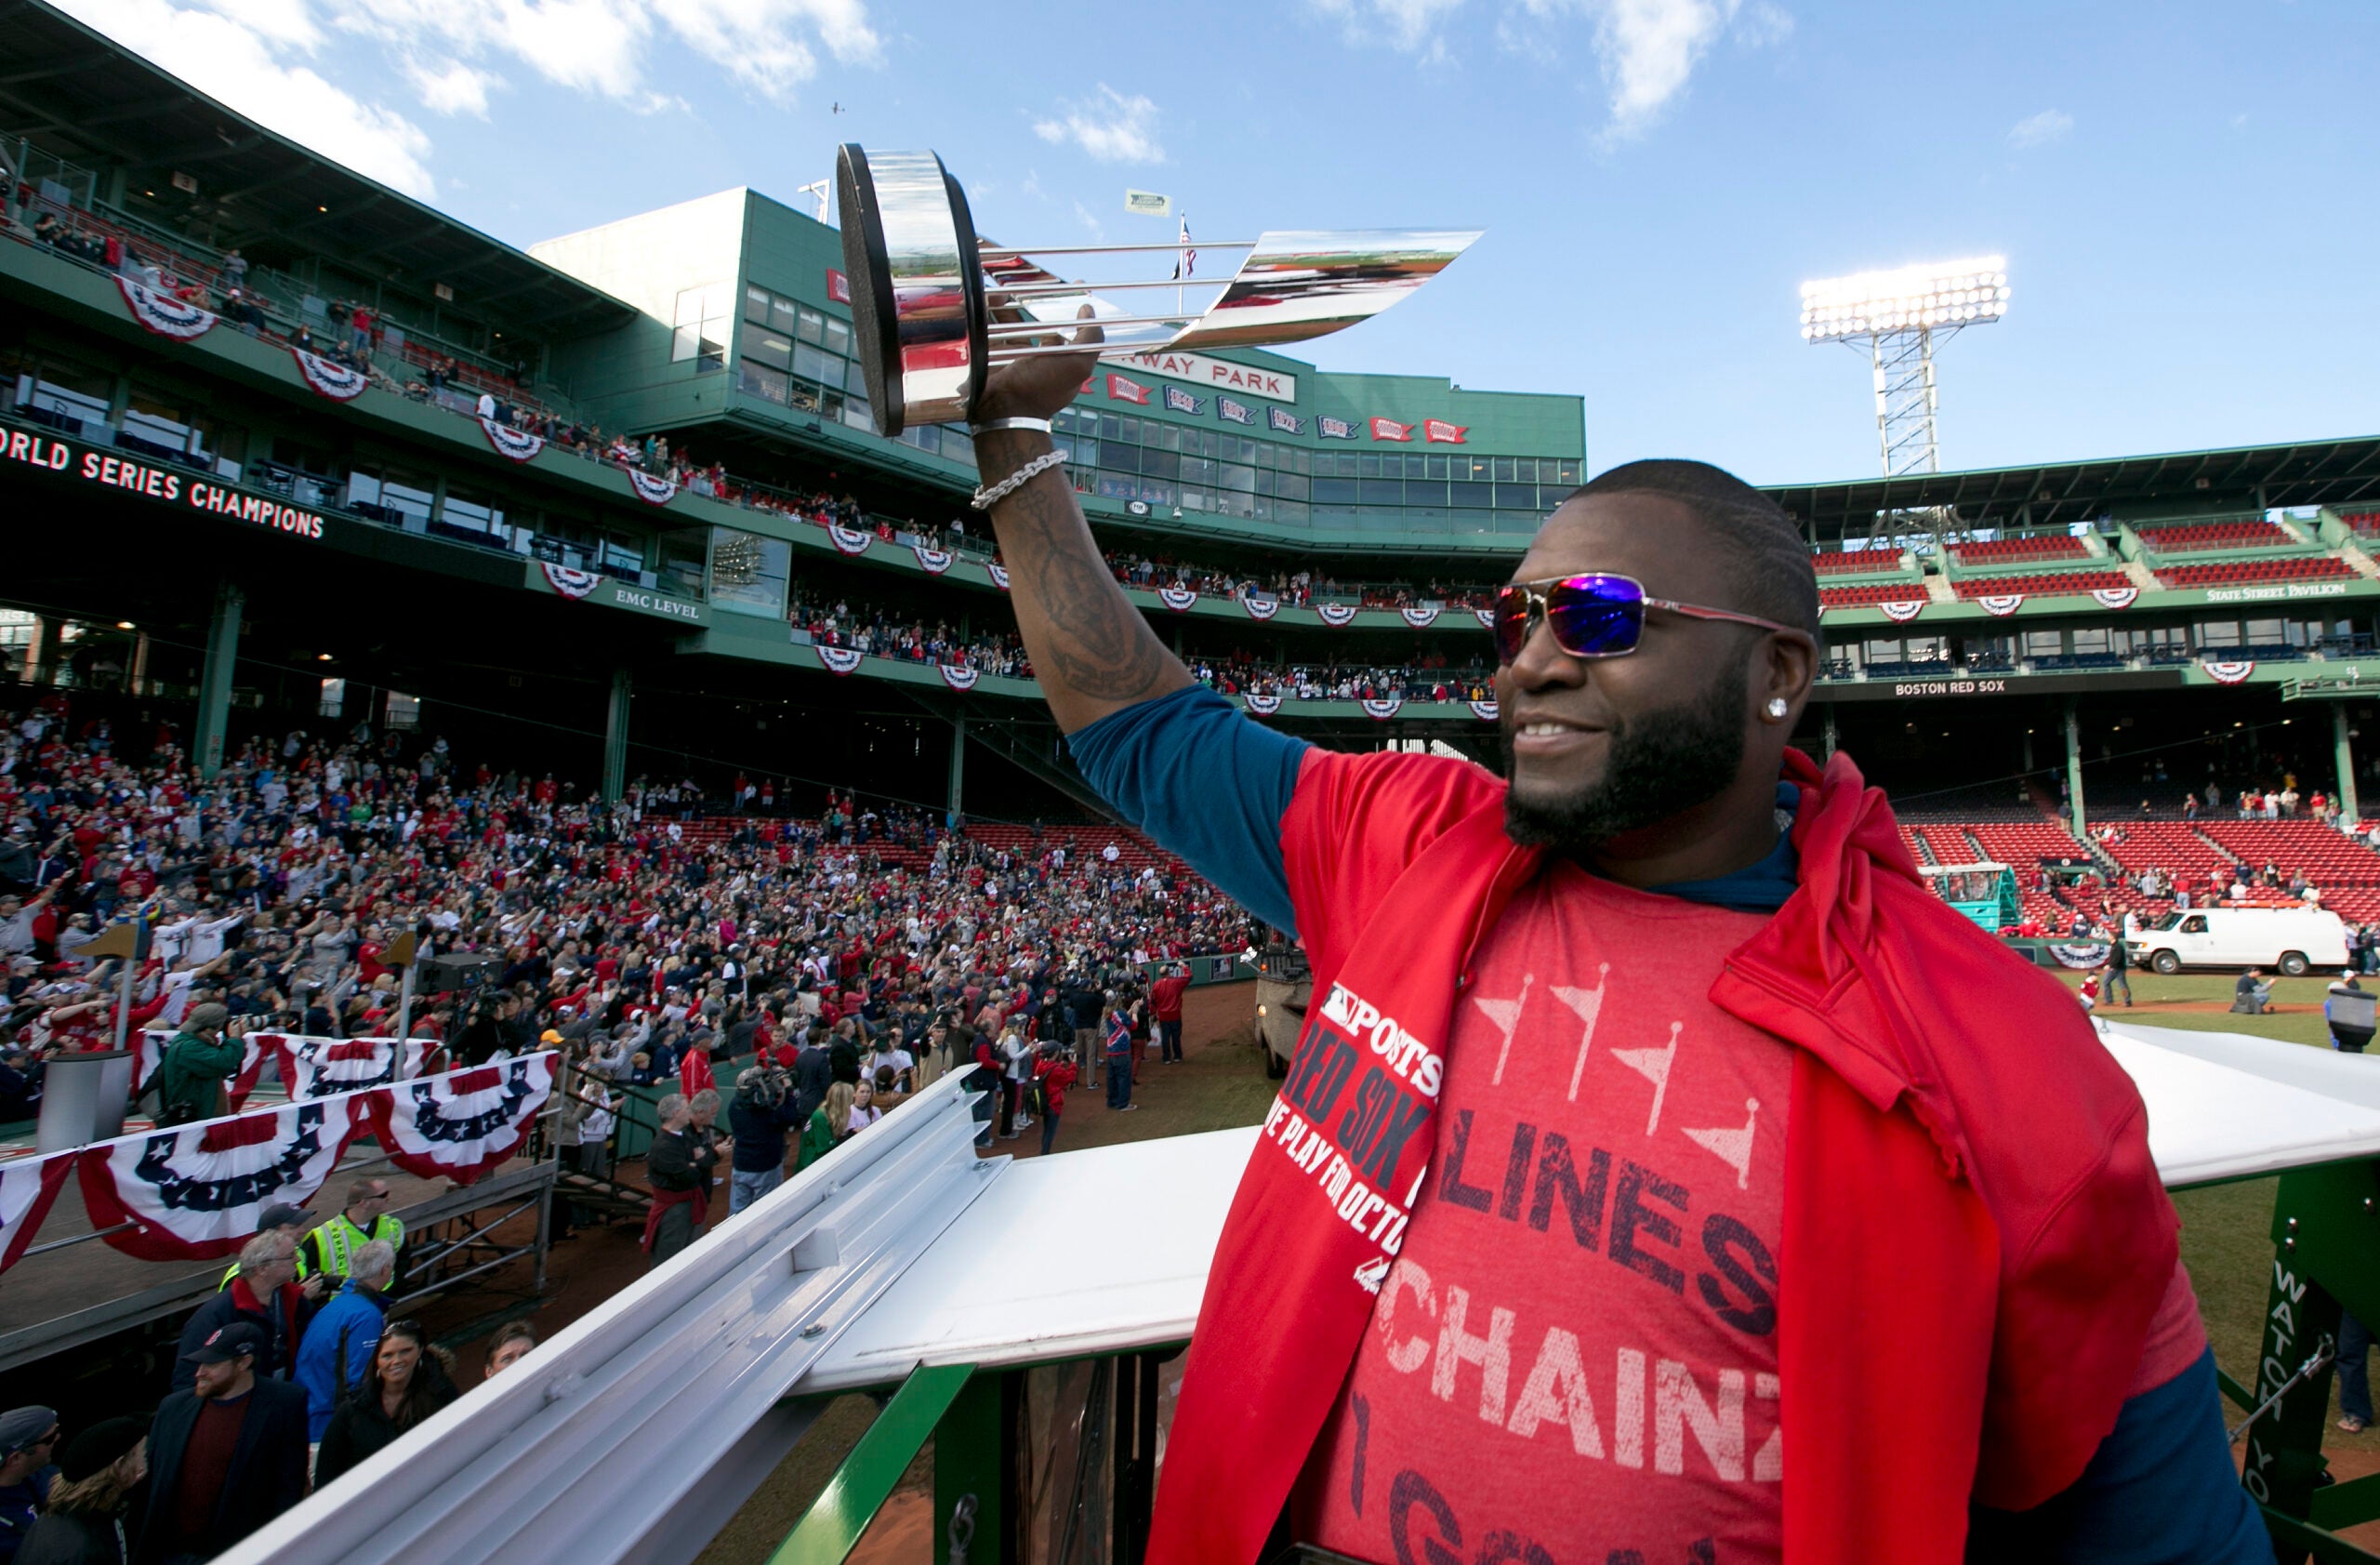 Boston Red Sox DH David Ortiz holds the MVP trophy at Fenway Park at the start of the 2013 World Series Rolling Rally victory parade in Boston on Saturday, Nov. 2, 2013.